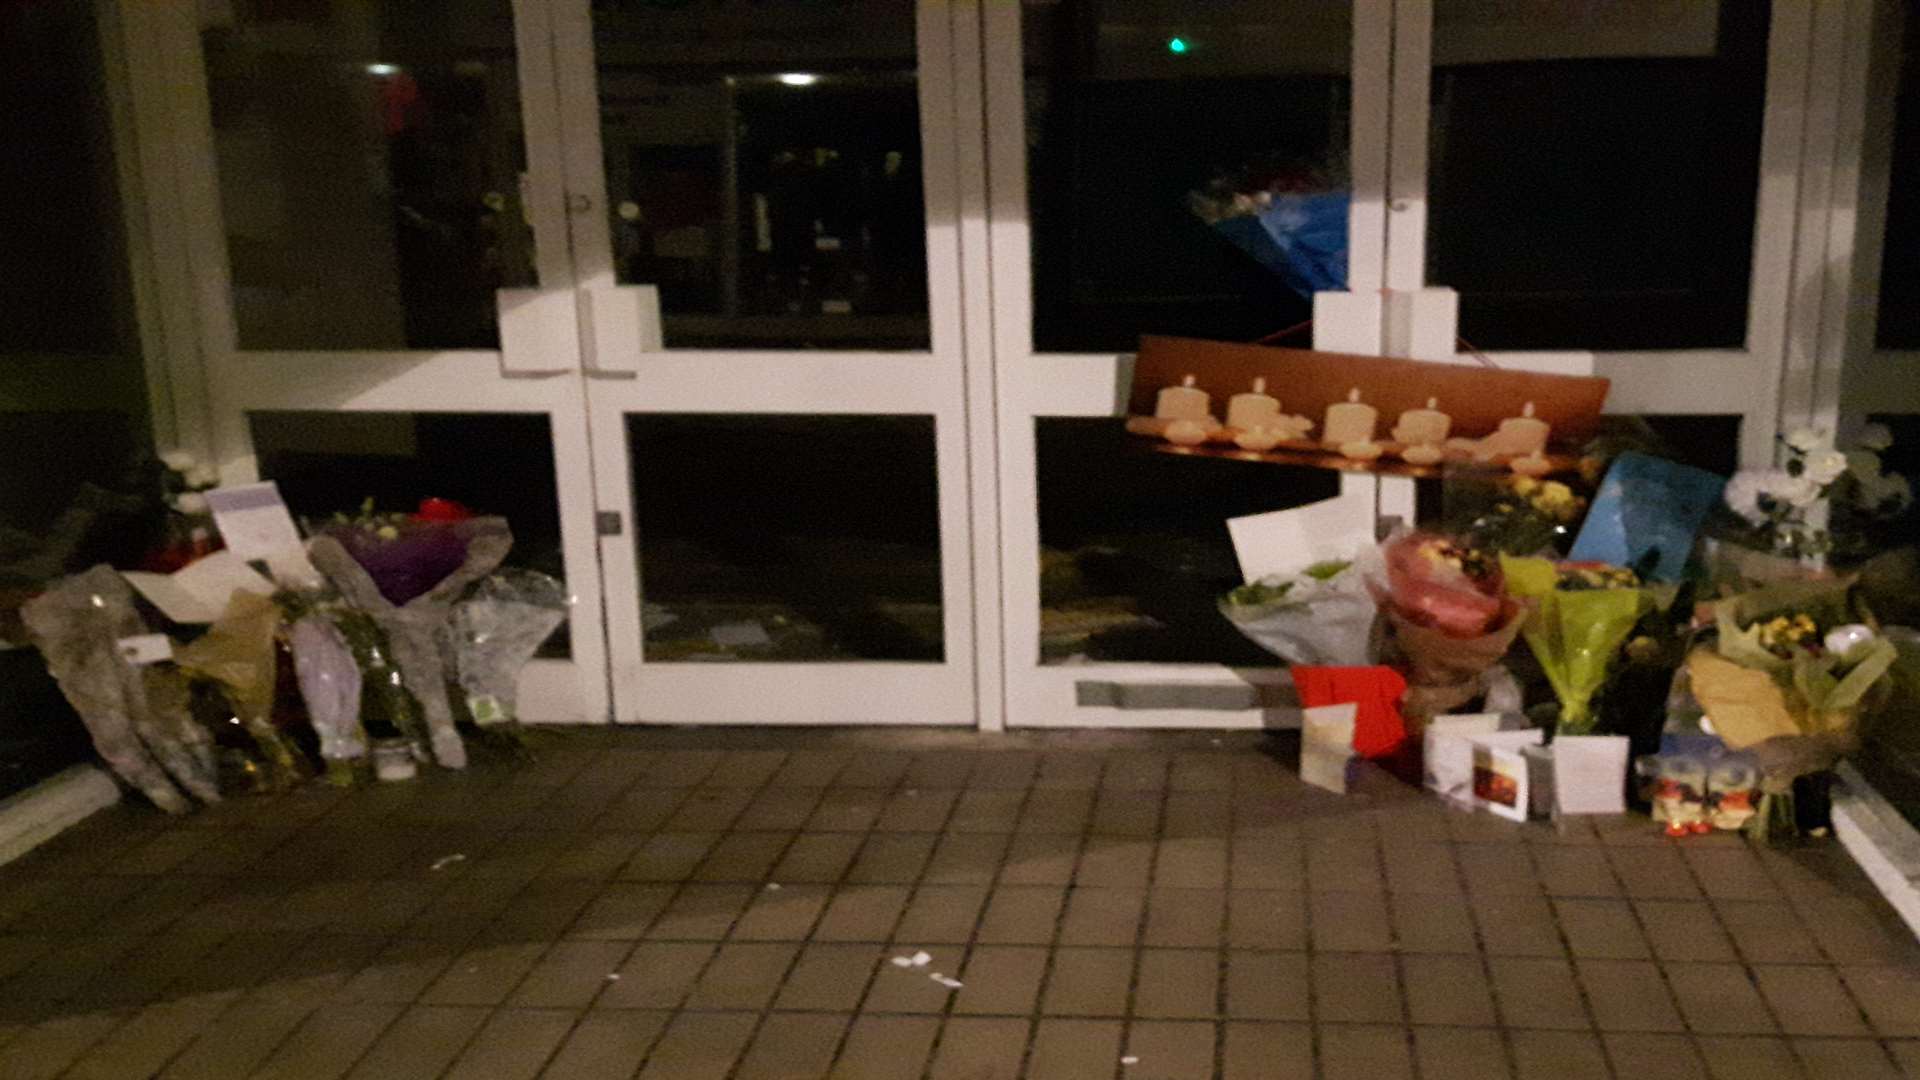 Floral tributes for Michael McCluskey, who was found dead on Chatham High Street on Christmas Eve